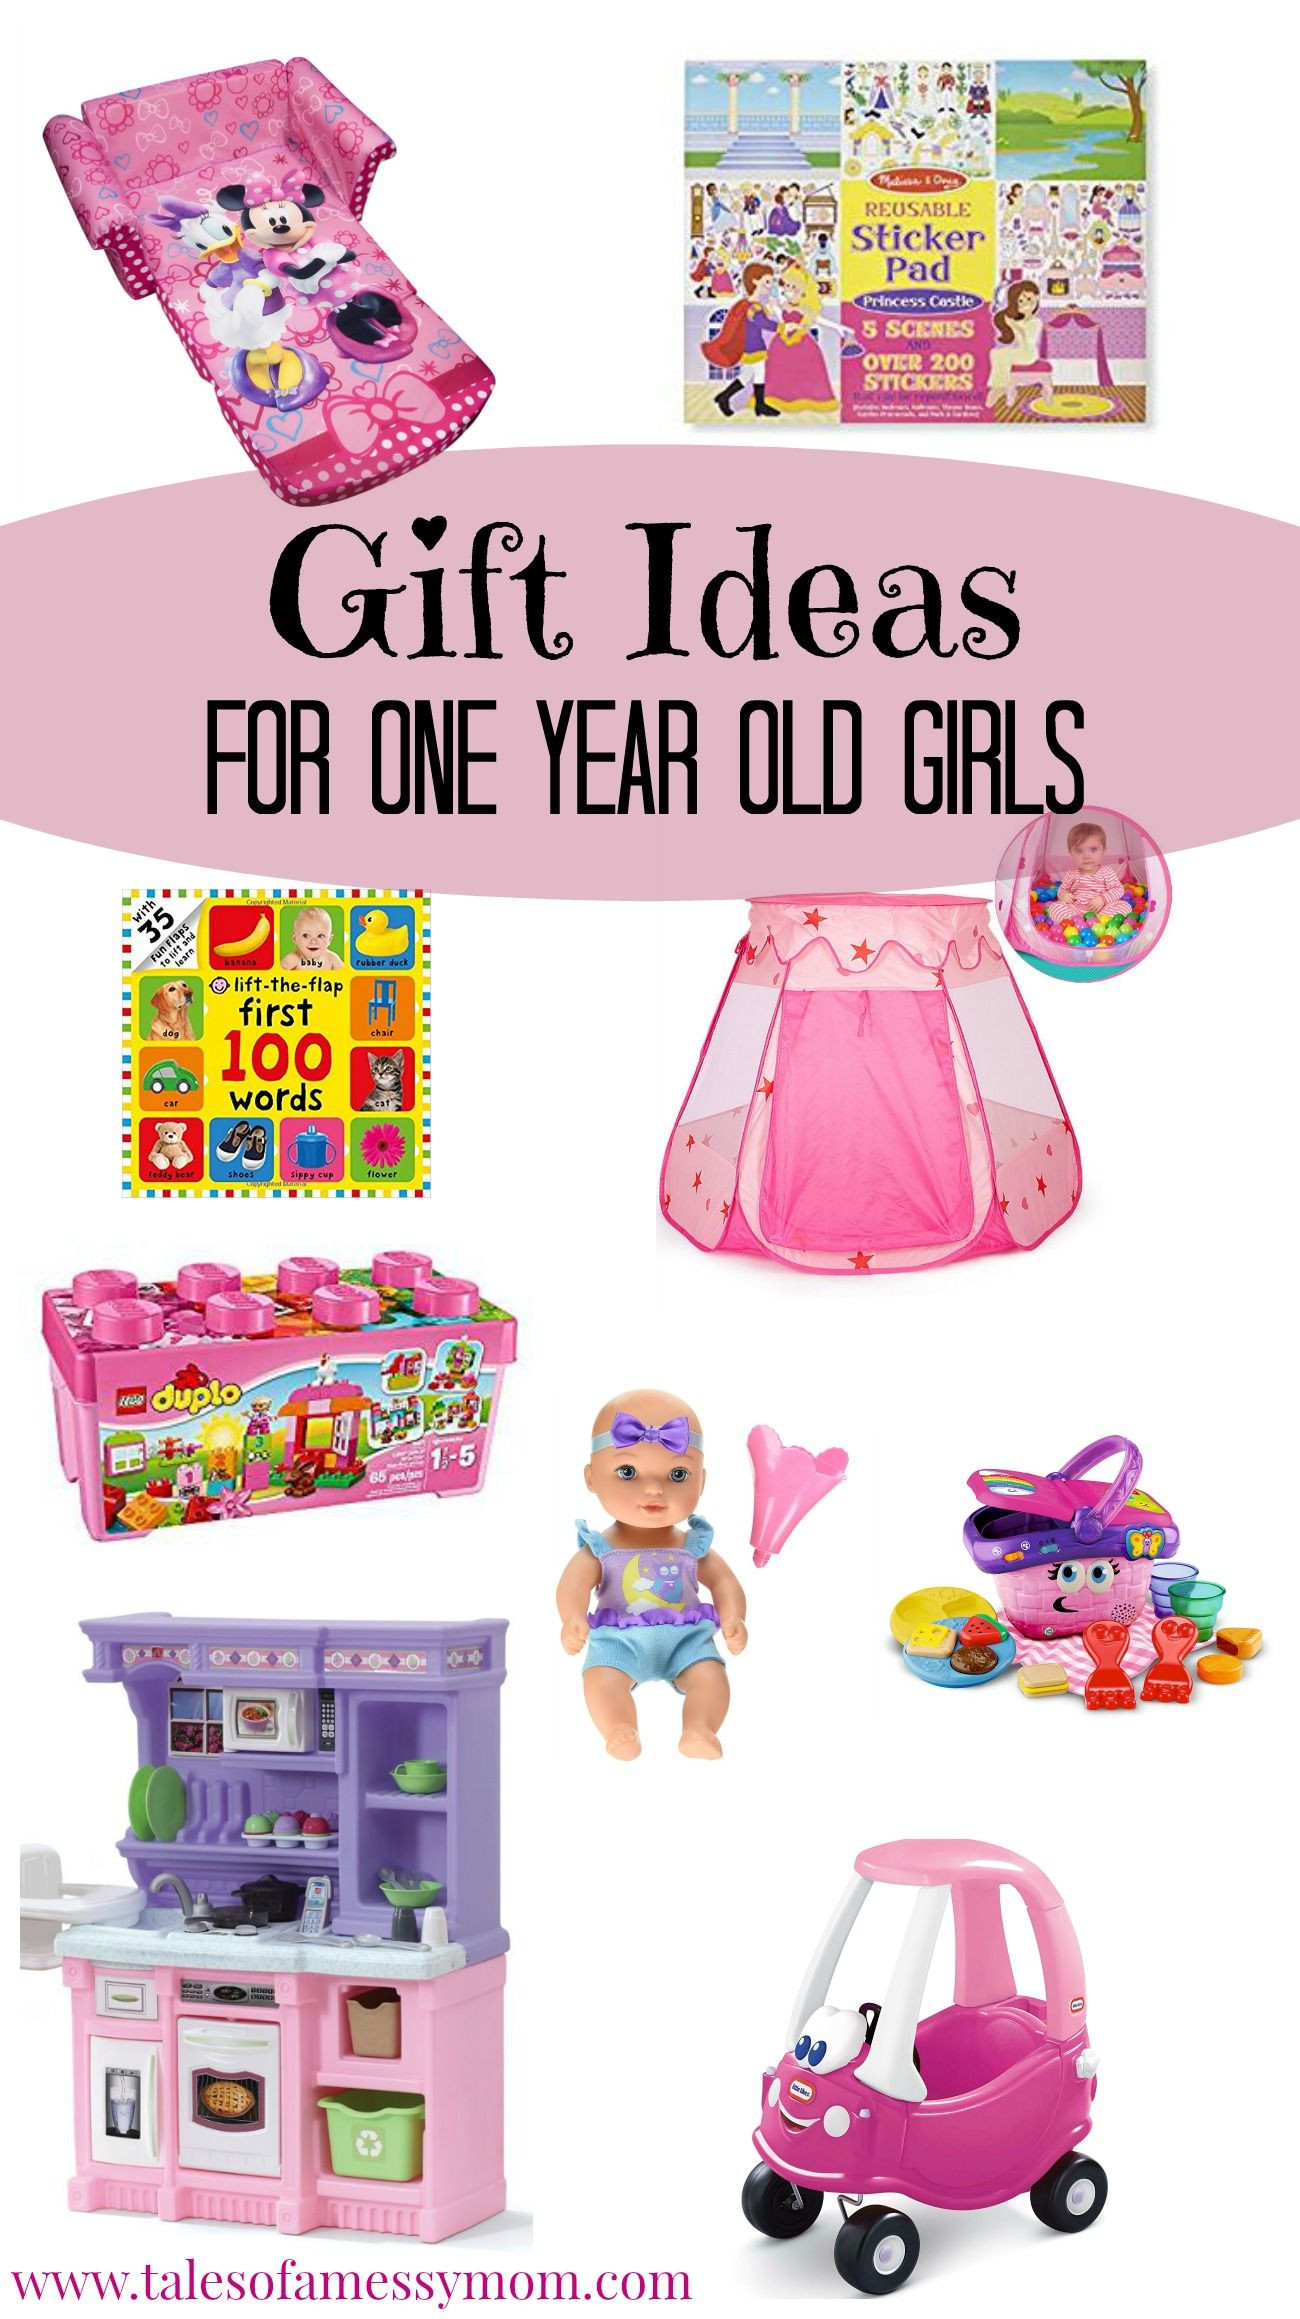 Gift For 1 Year Old Baby Girl Birthday
 Gift Ideas for e Year Old Girls